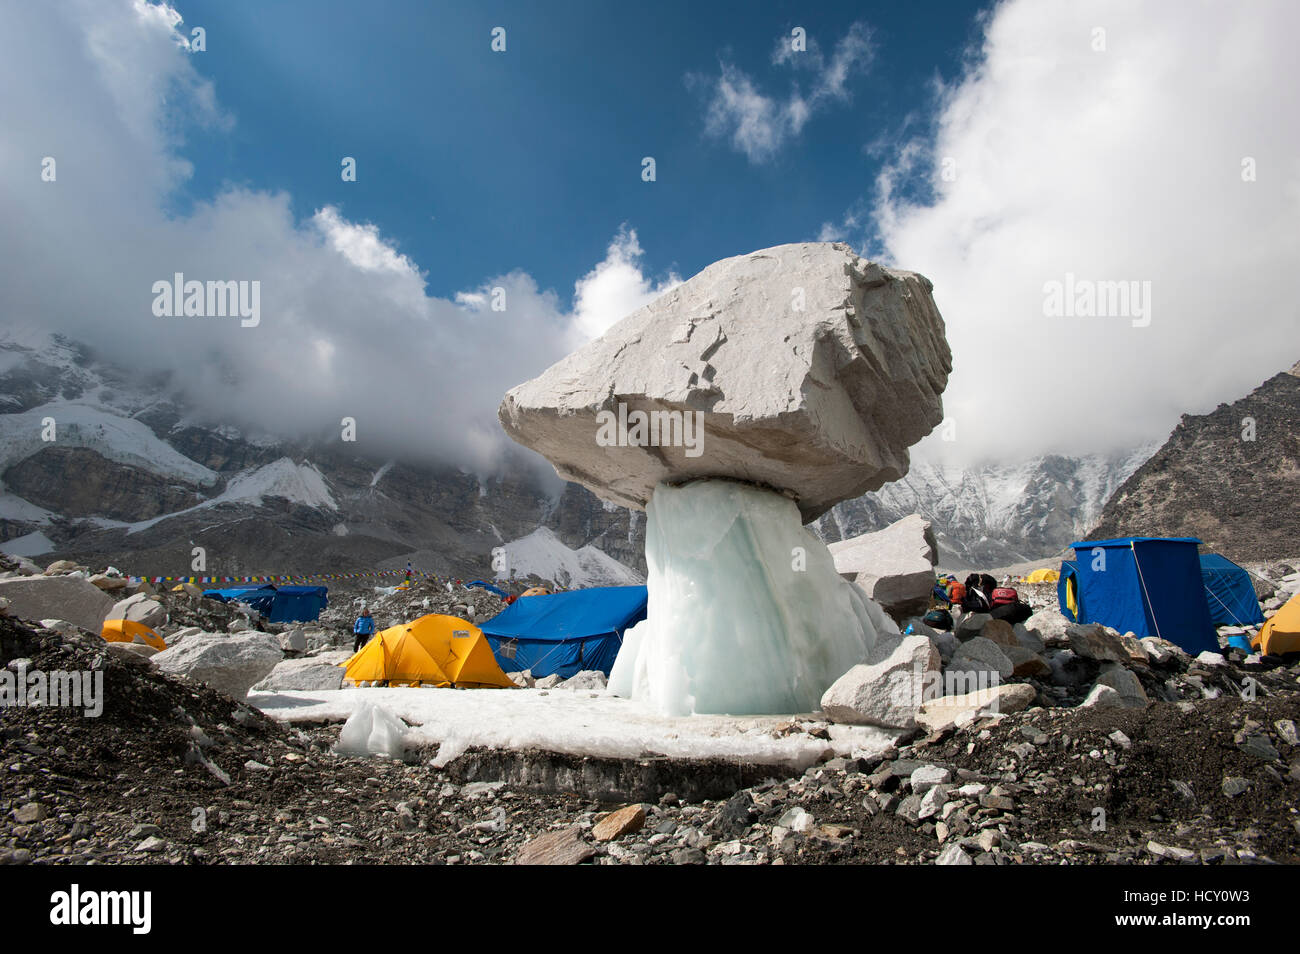 In the spring the glacier begins to melt, but shadow areas are protecting the ice underneath, Khumbu Region, Nepal Stock Photo